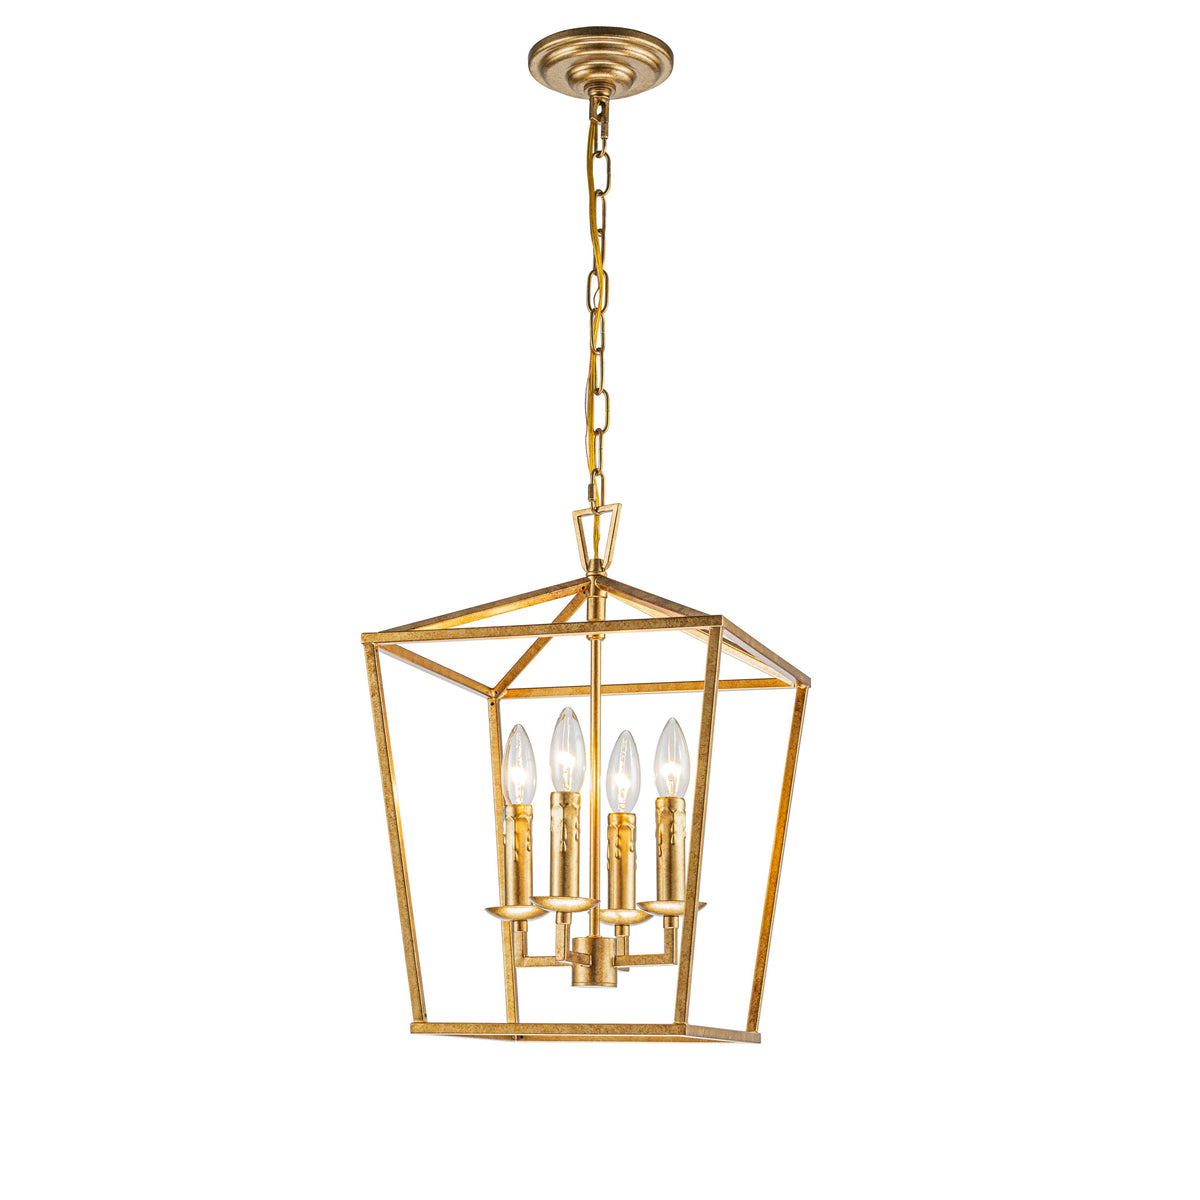 Modern Candle Style Lantern Chandelier Coastal Farmhouse  Cage Pendant in Antique Brass